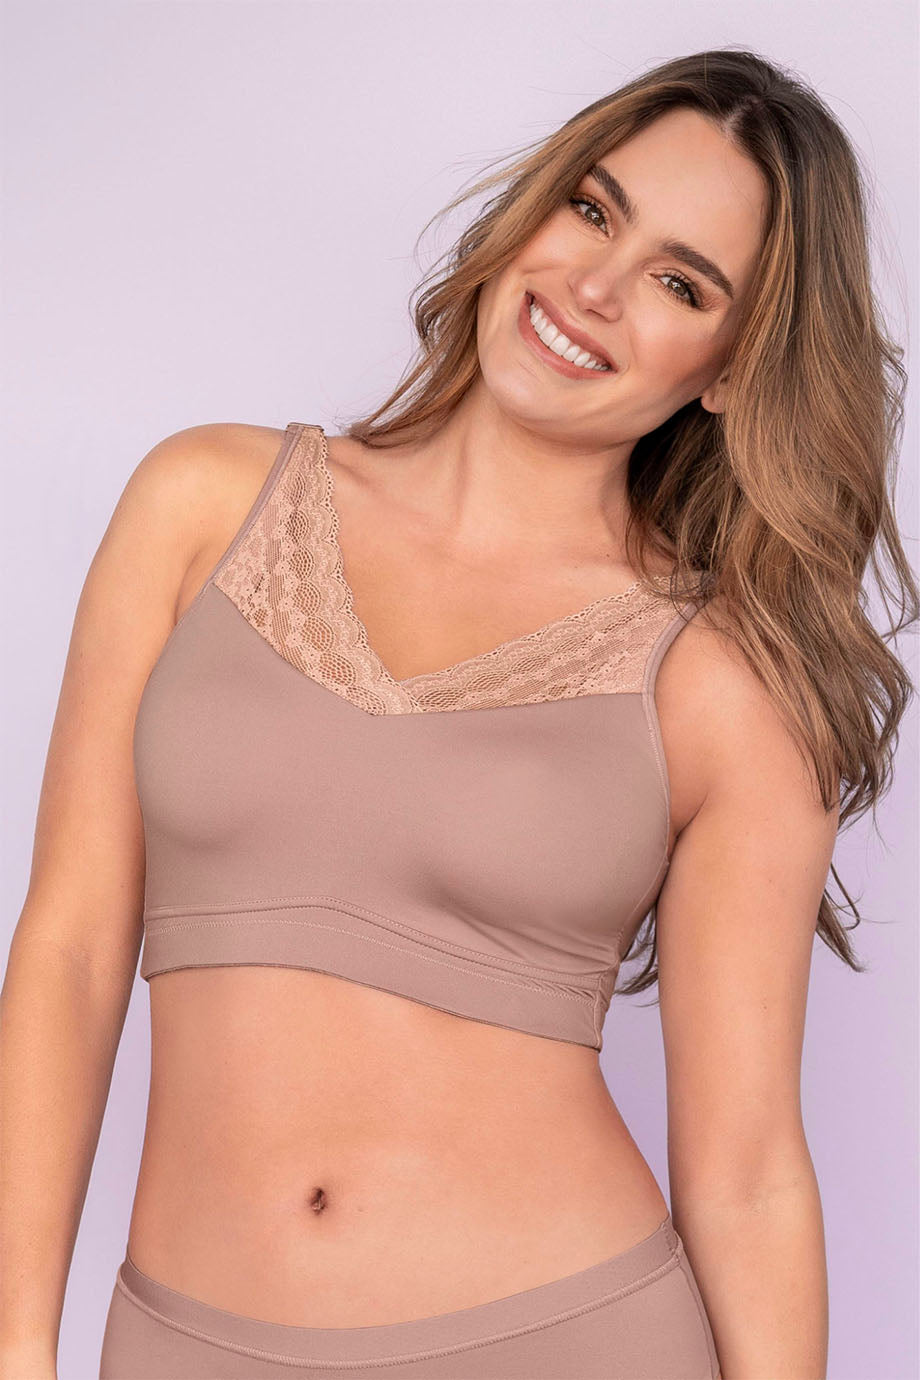 What Happens if You Don't Wear Your Post-Surgical Bra? - Mastectomy Shop